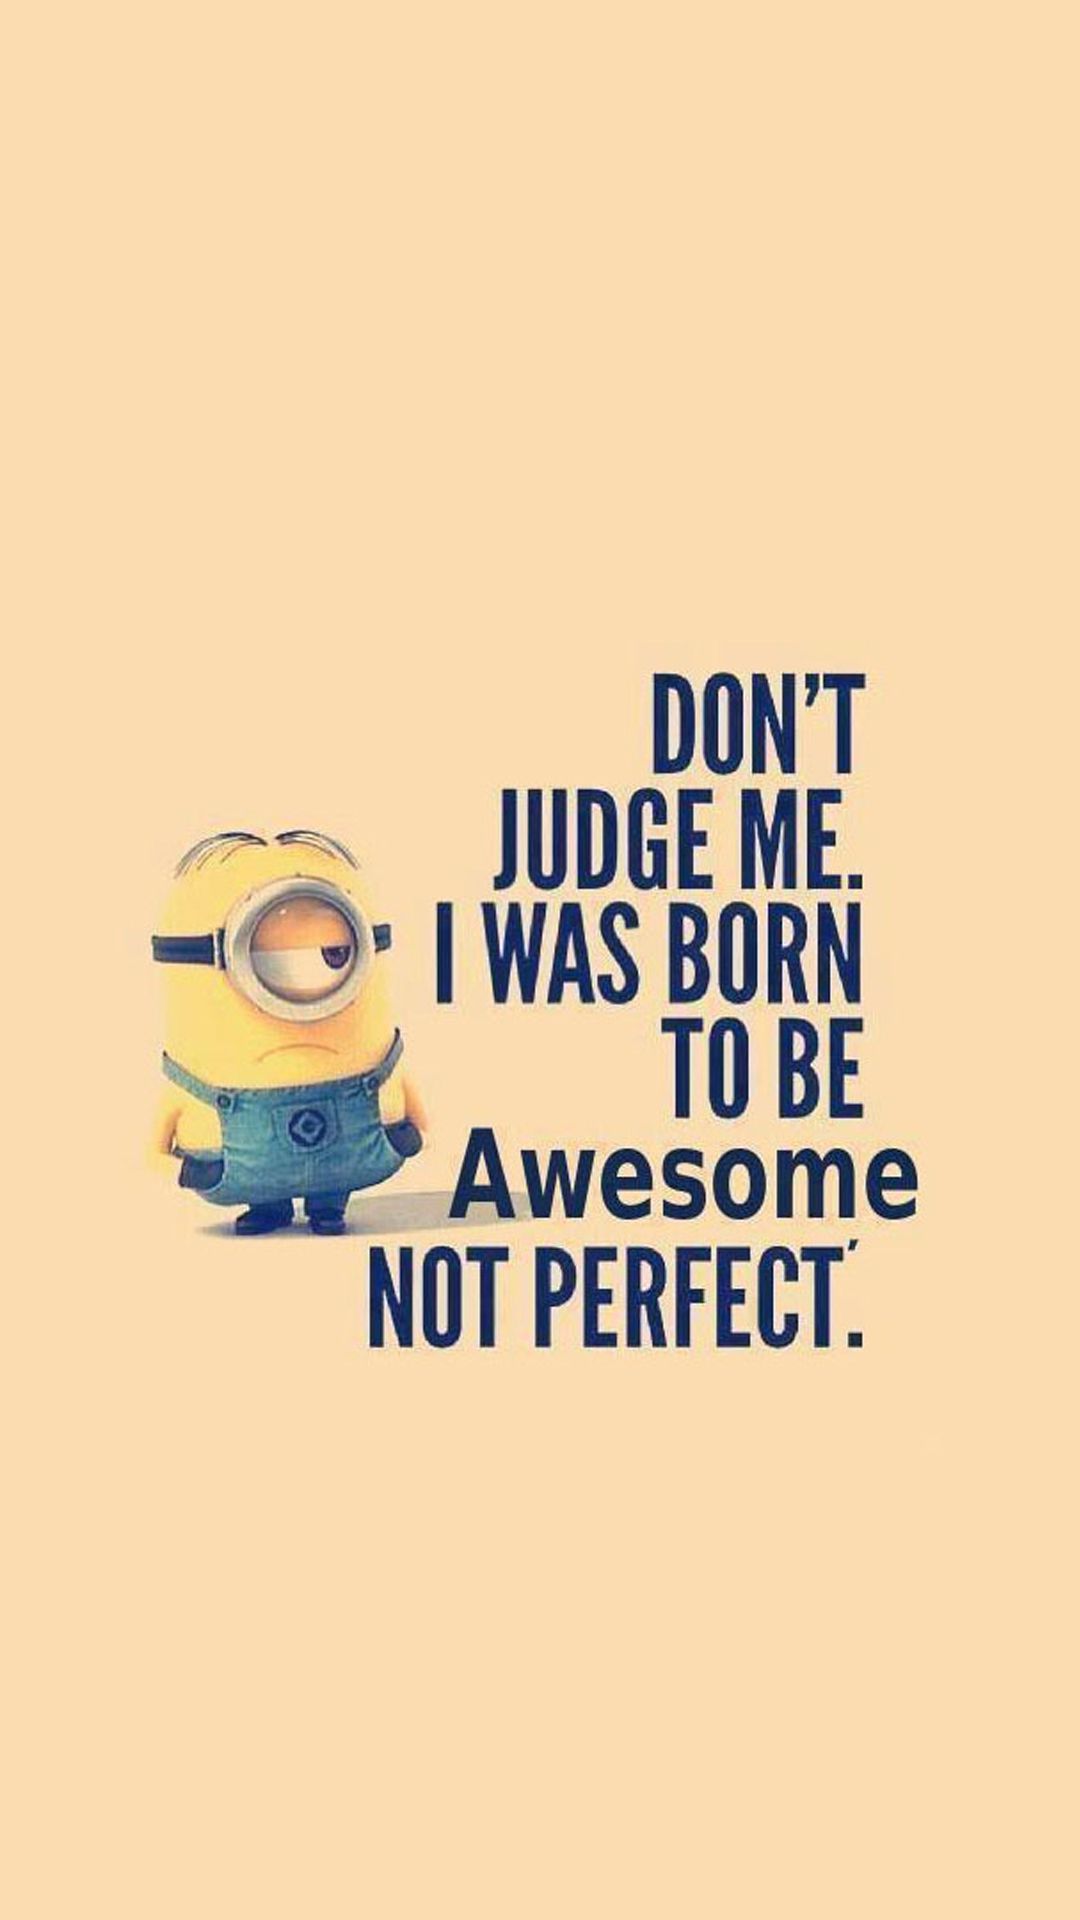 Typography iPhone Wallpaper Download For Free. Funny minion quotes, Funny iphone wallpaper, Minions quotes